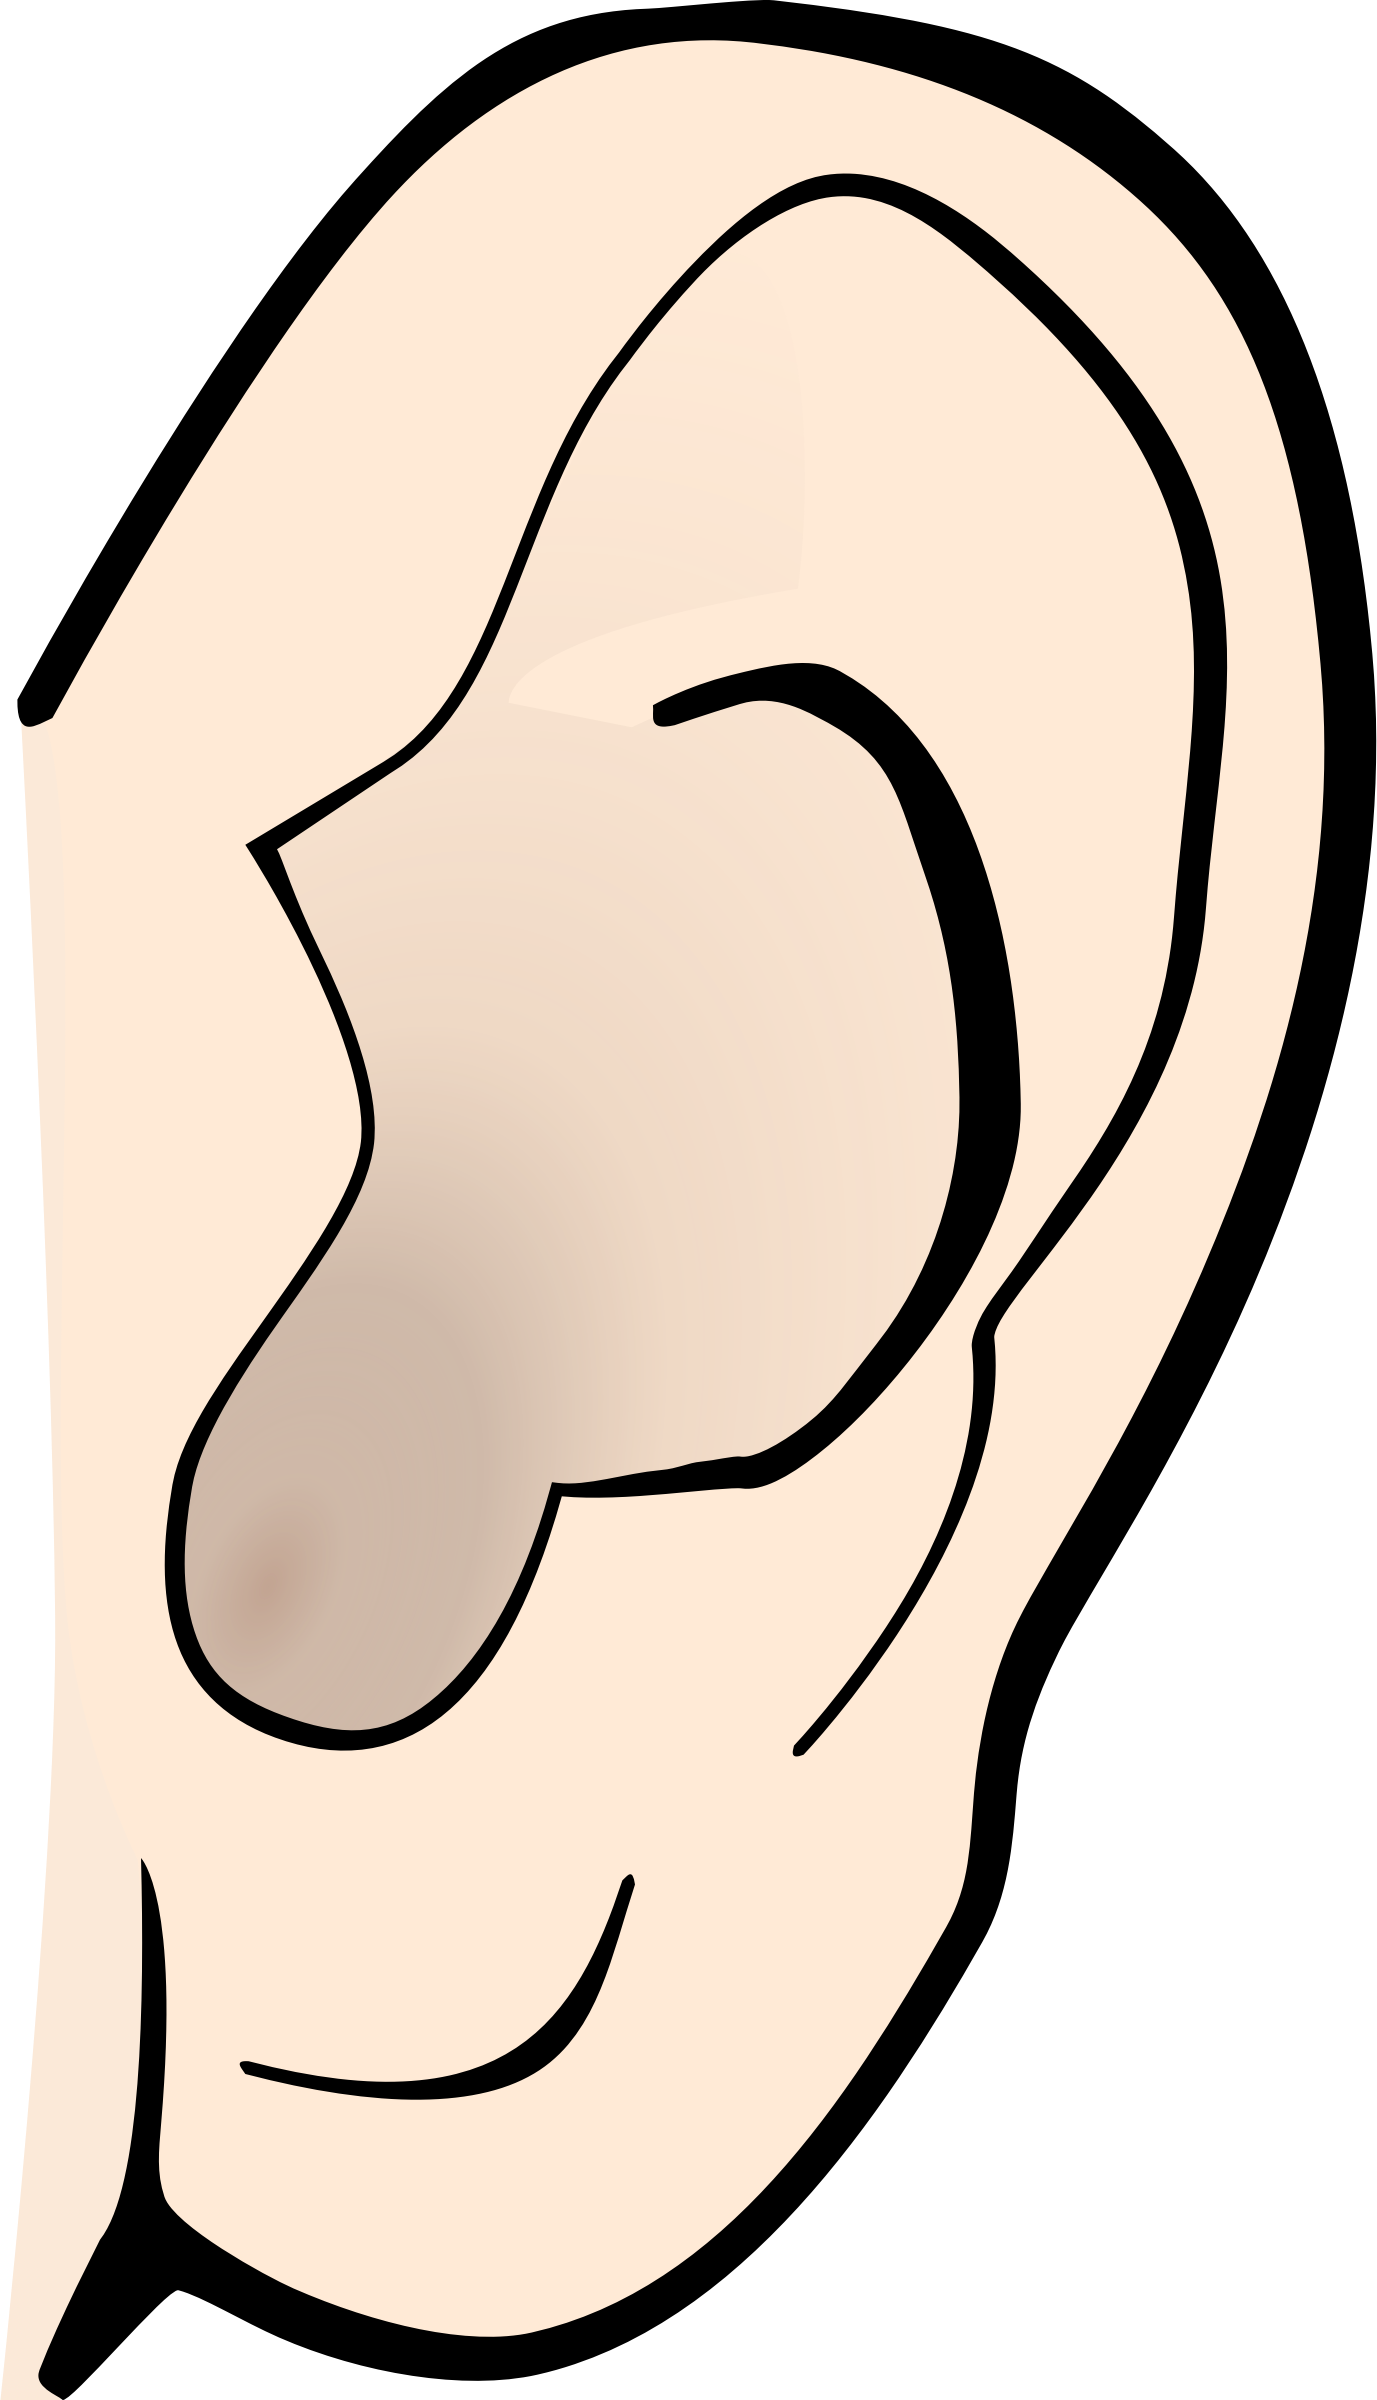  senses at getdrawings. Clipart ear hand over